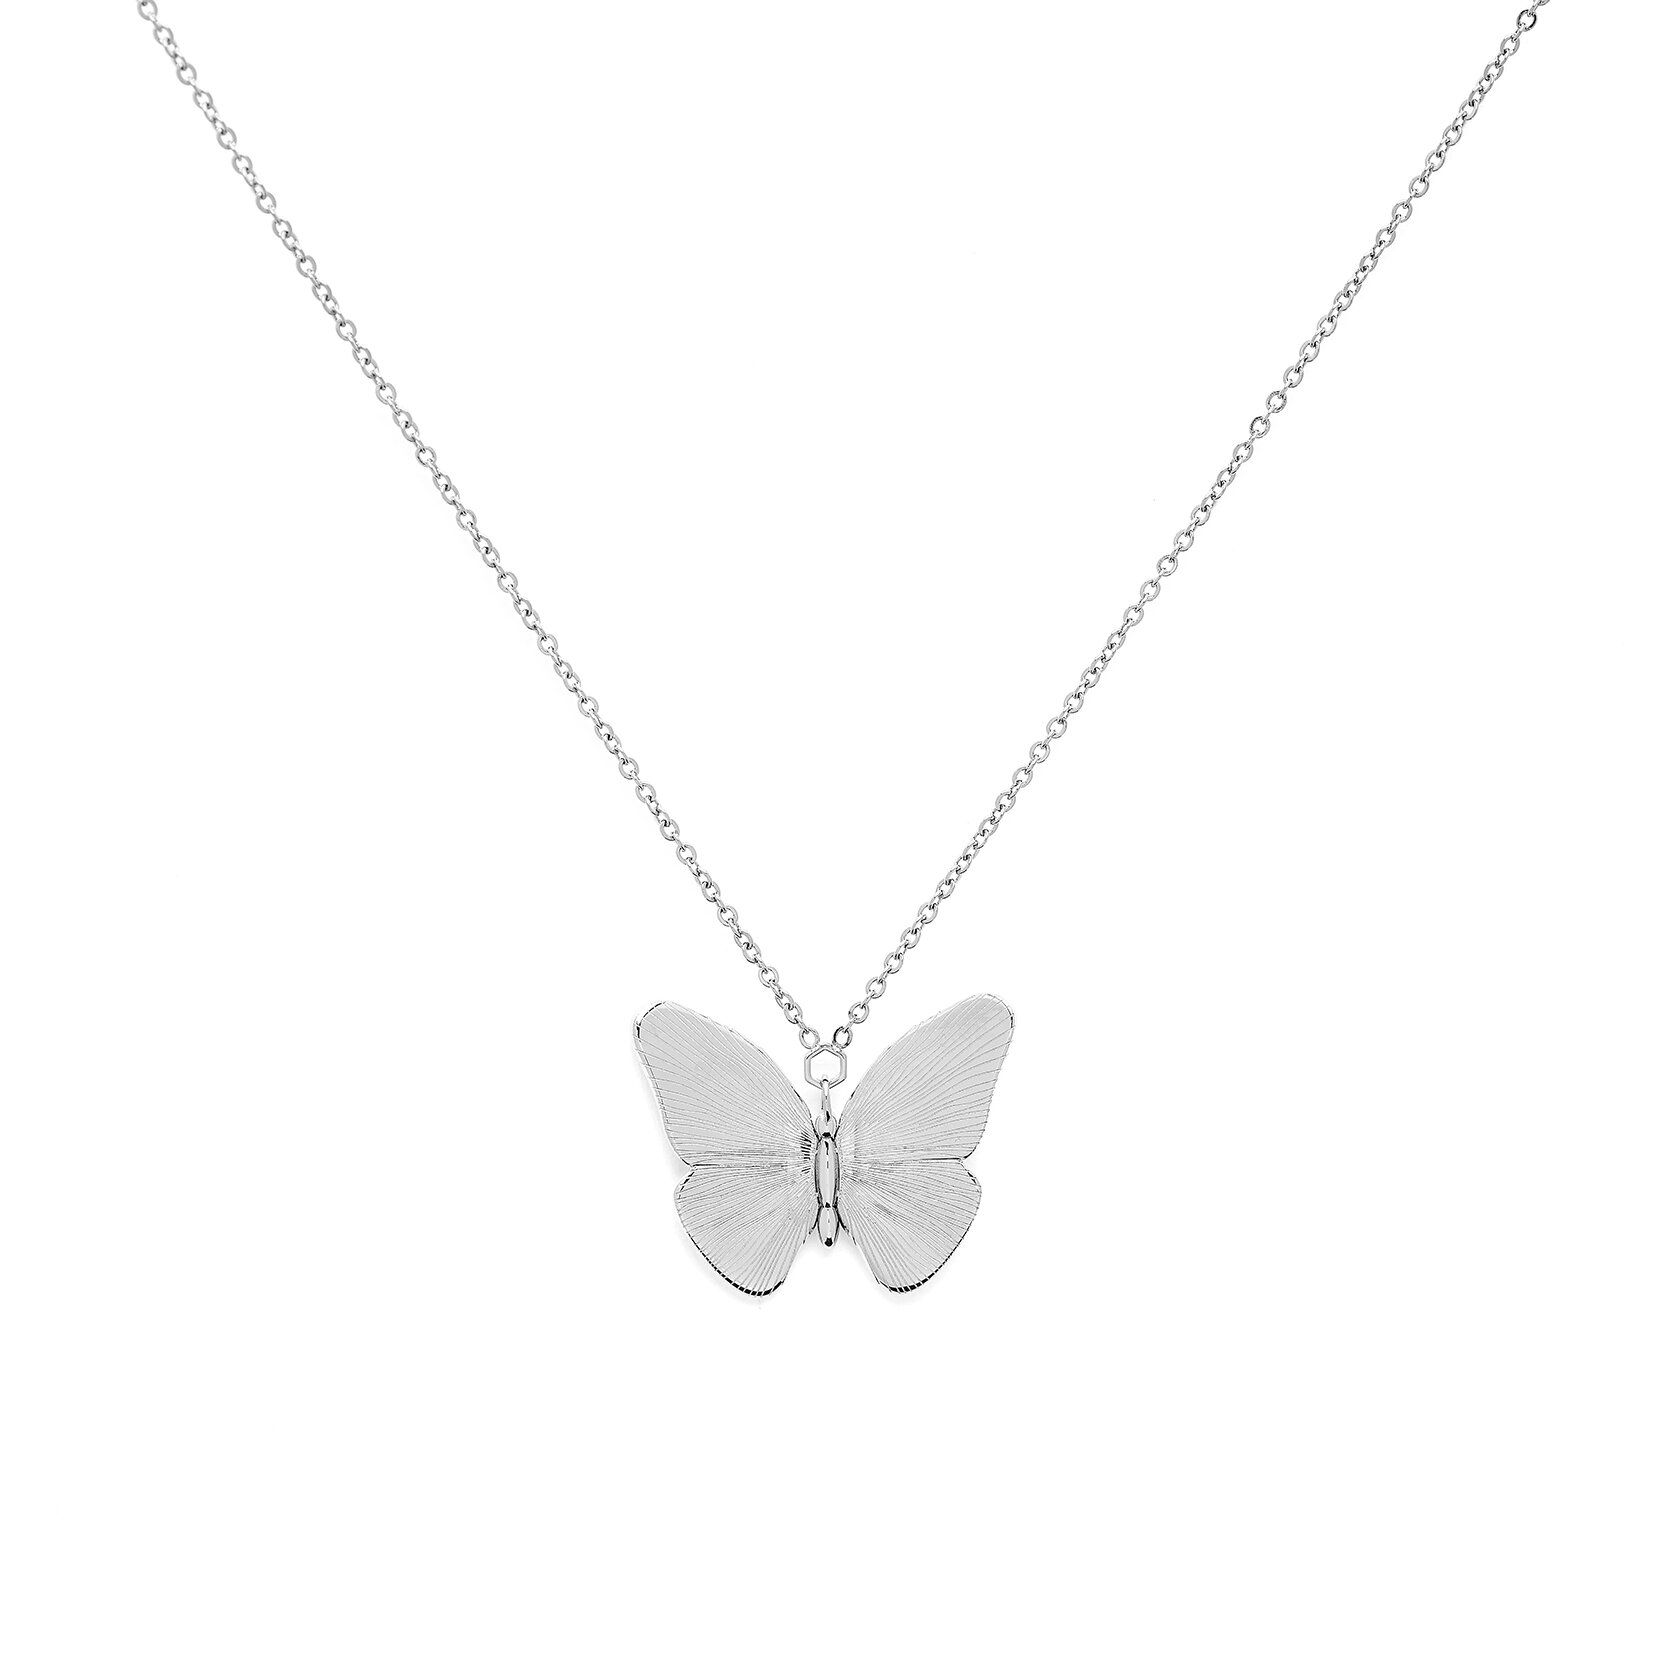 2028 Silver-Tone Butterfly Magnifying Glass Pendant Necklace